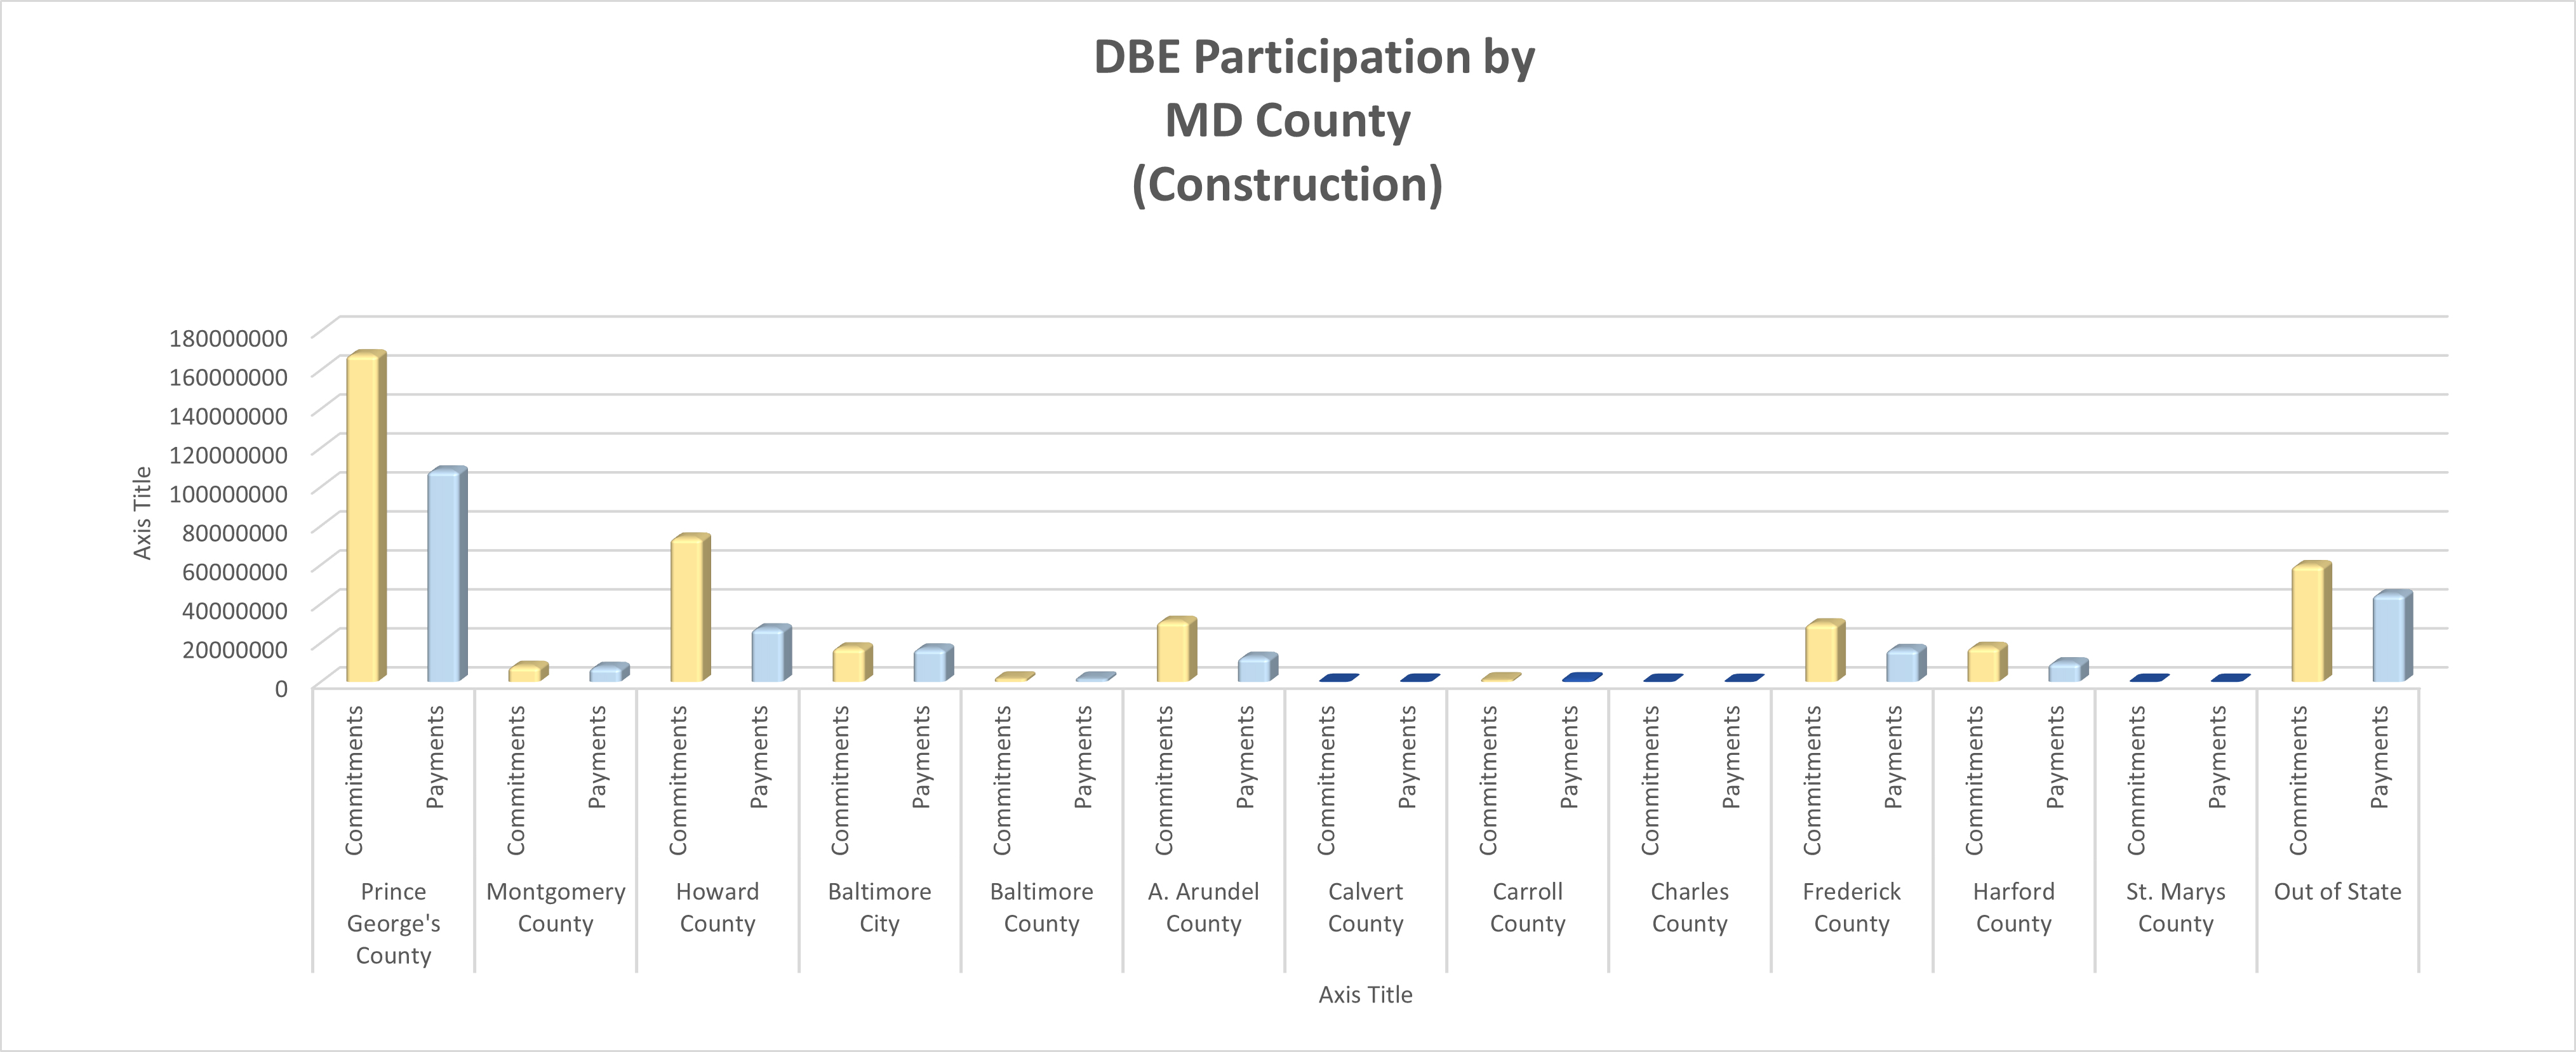 DBE Participation by MD County (Construction)